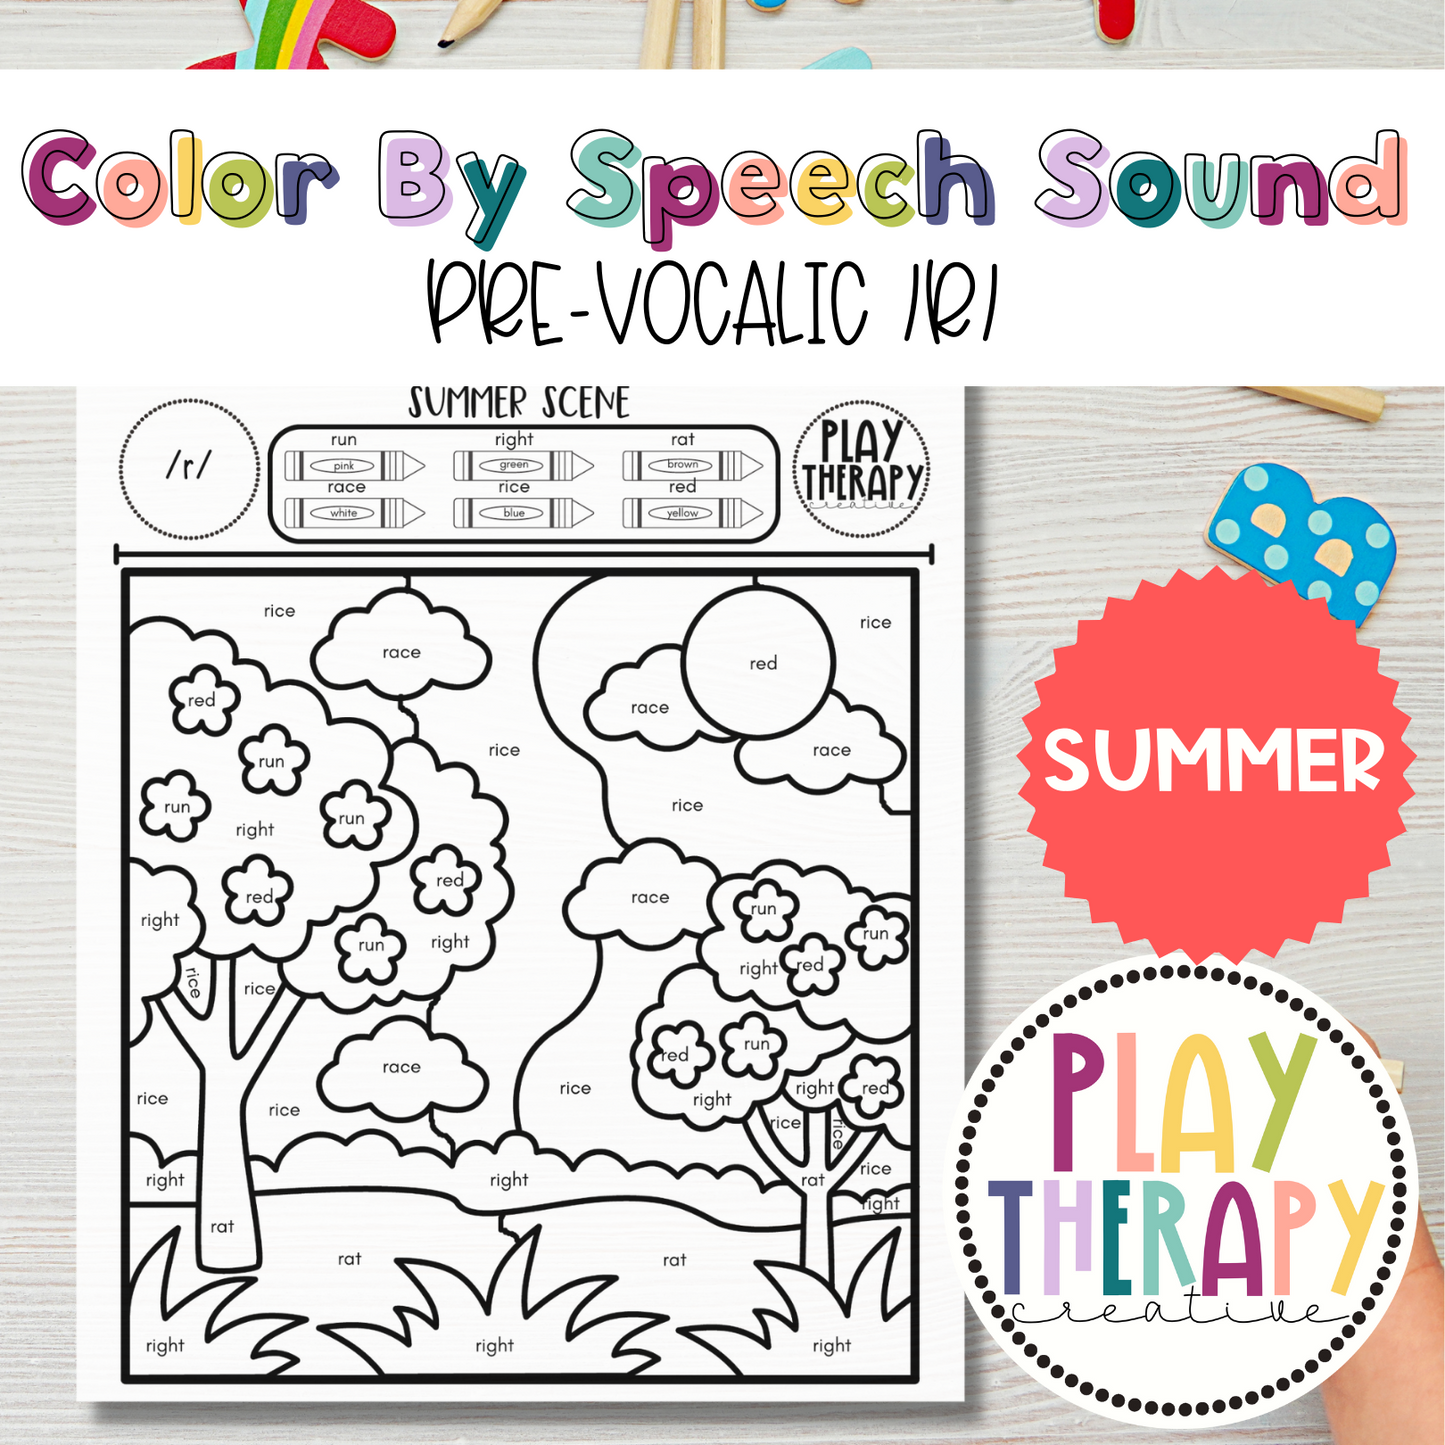 Pre-vocalic /r/ Sound Summer Themed Color-by-Speech-Sounds for Speech Therapy